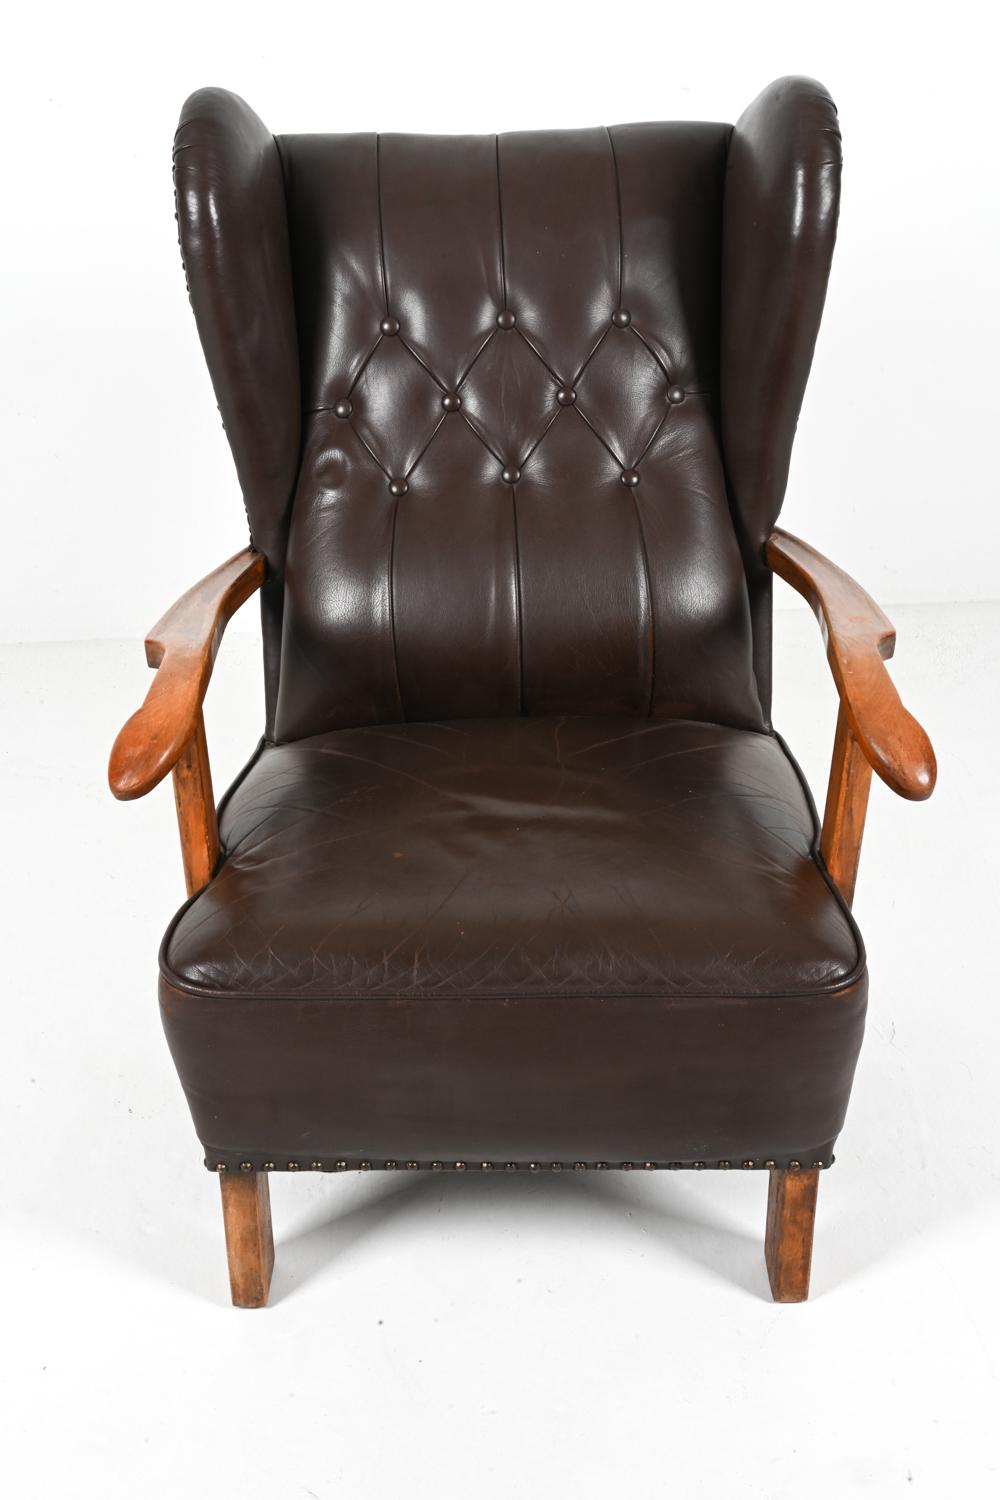 20th Century Fritz Hansen Model 1582 Wingback Lounge Chair in Beech & Leather, c. 1940's For Sale